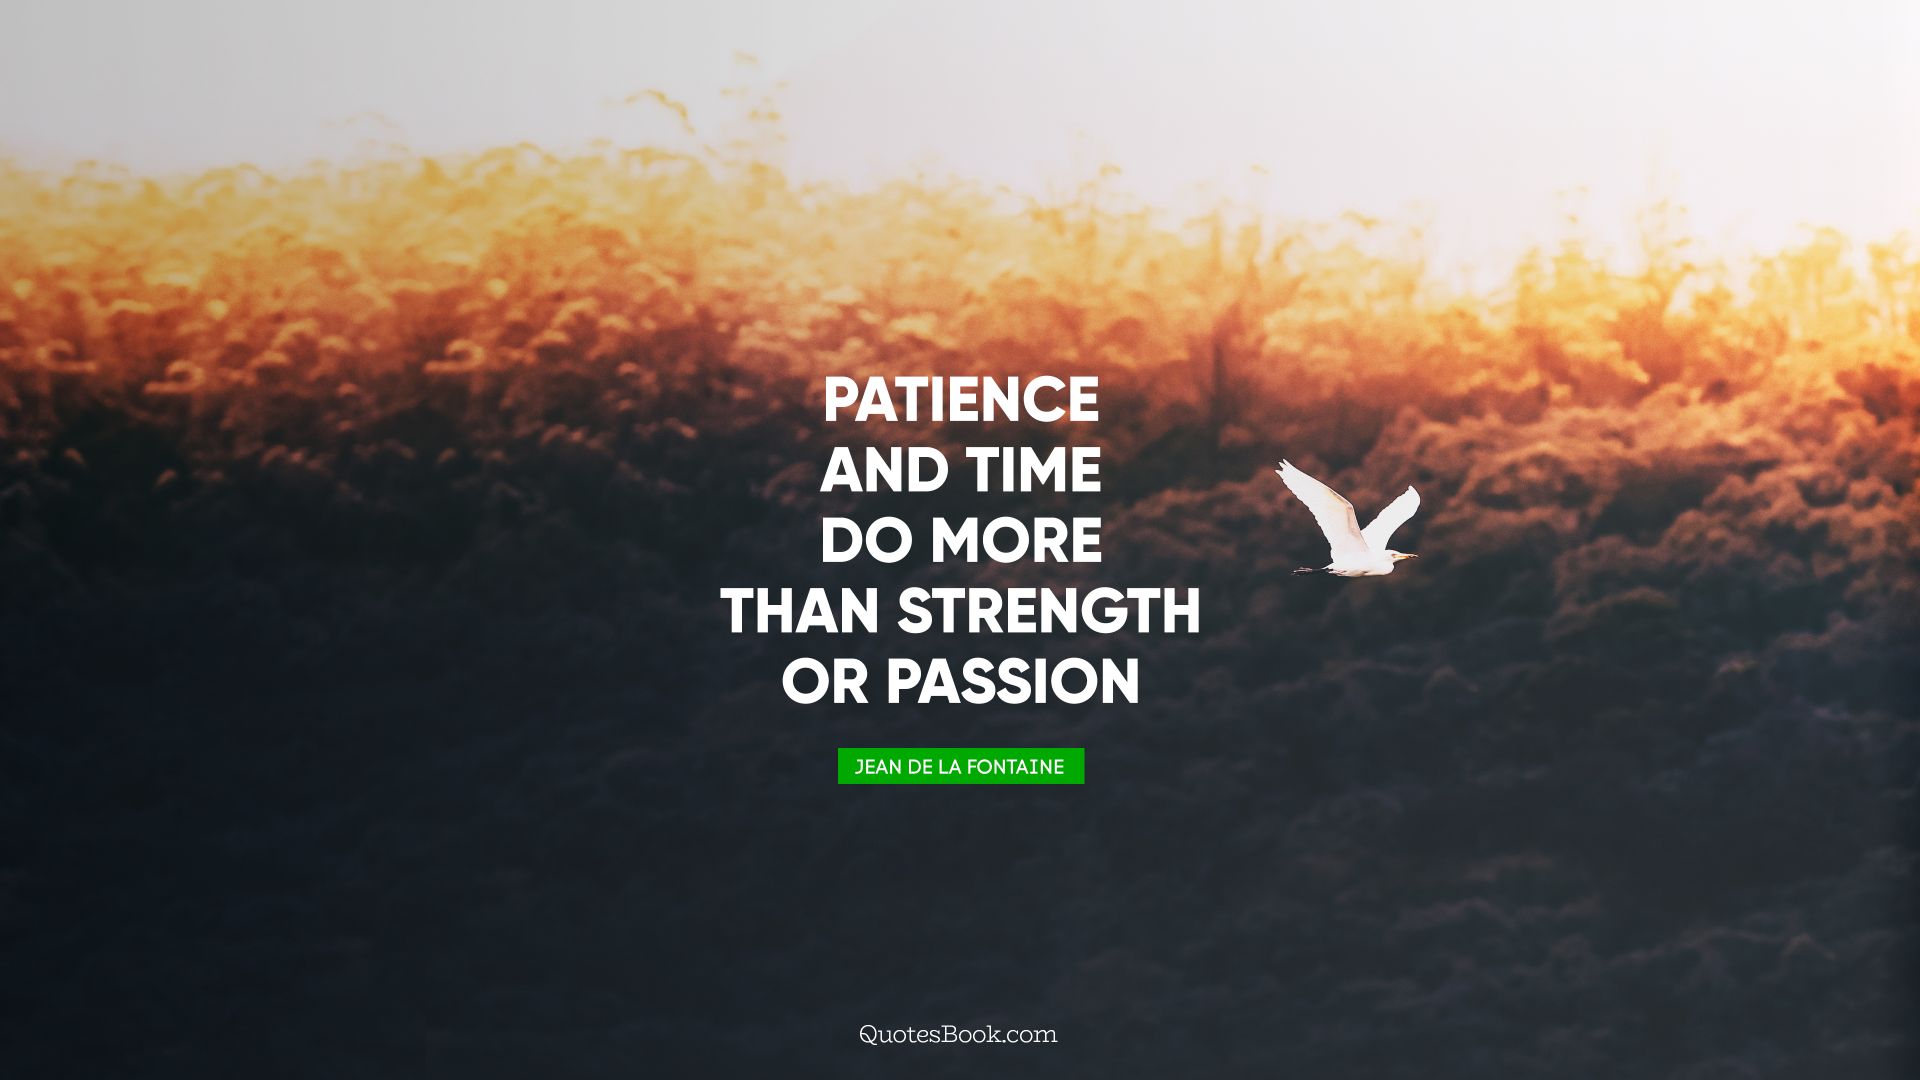 Patience and time do more than strength or passion. - Quote by Jean de La Fontaine